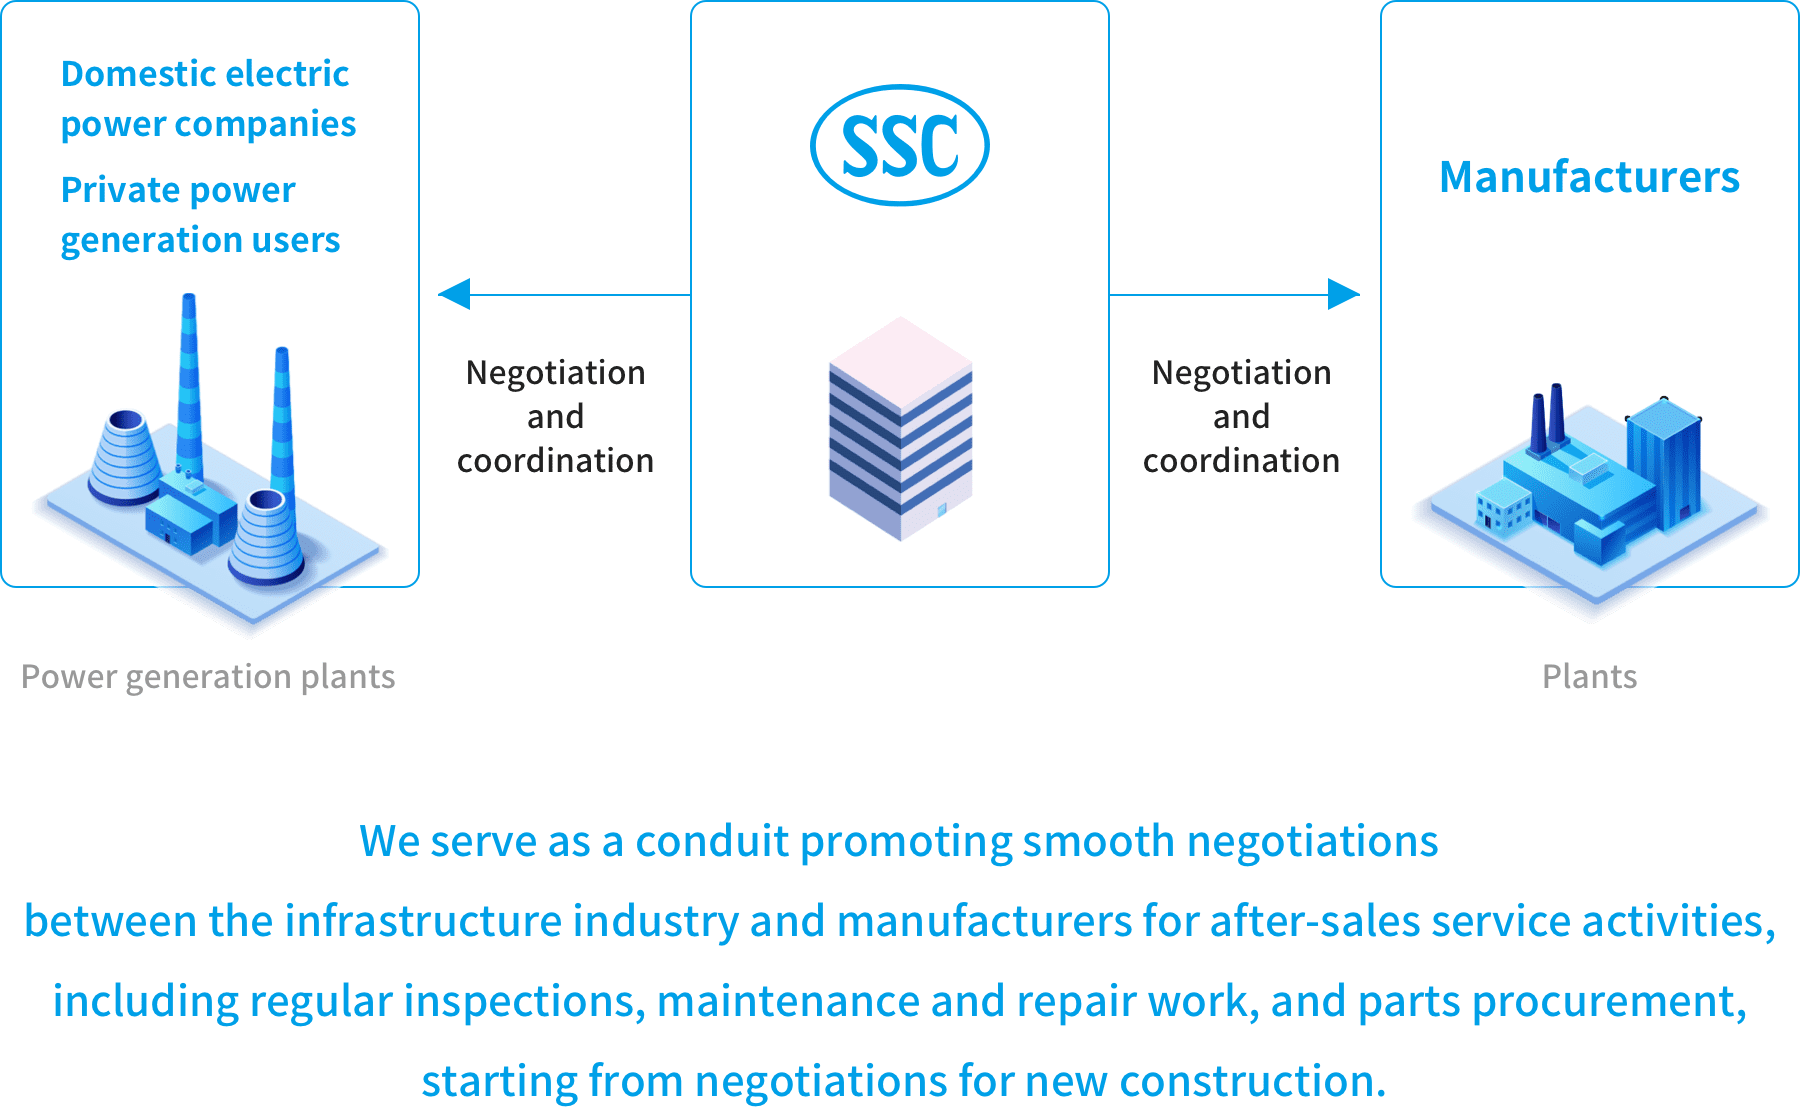 SSC's role in facilitating industry negotiations